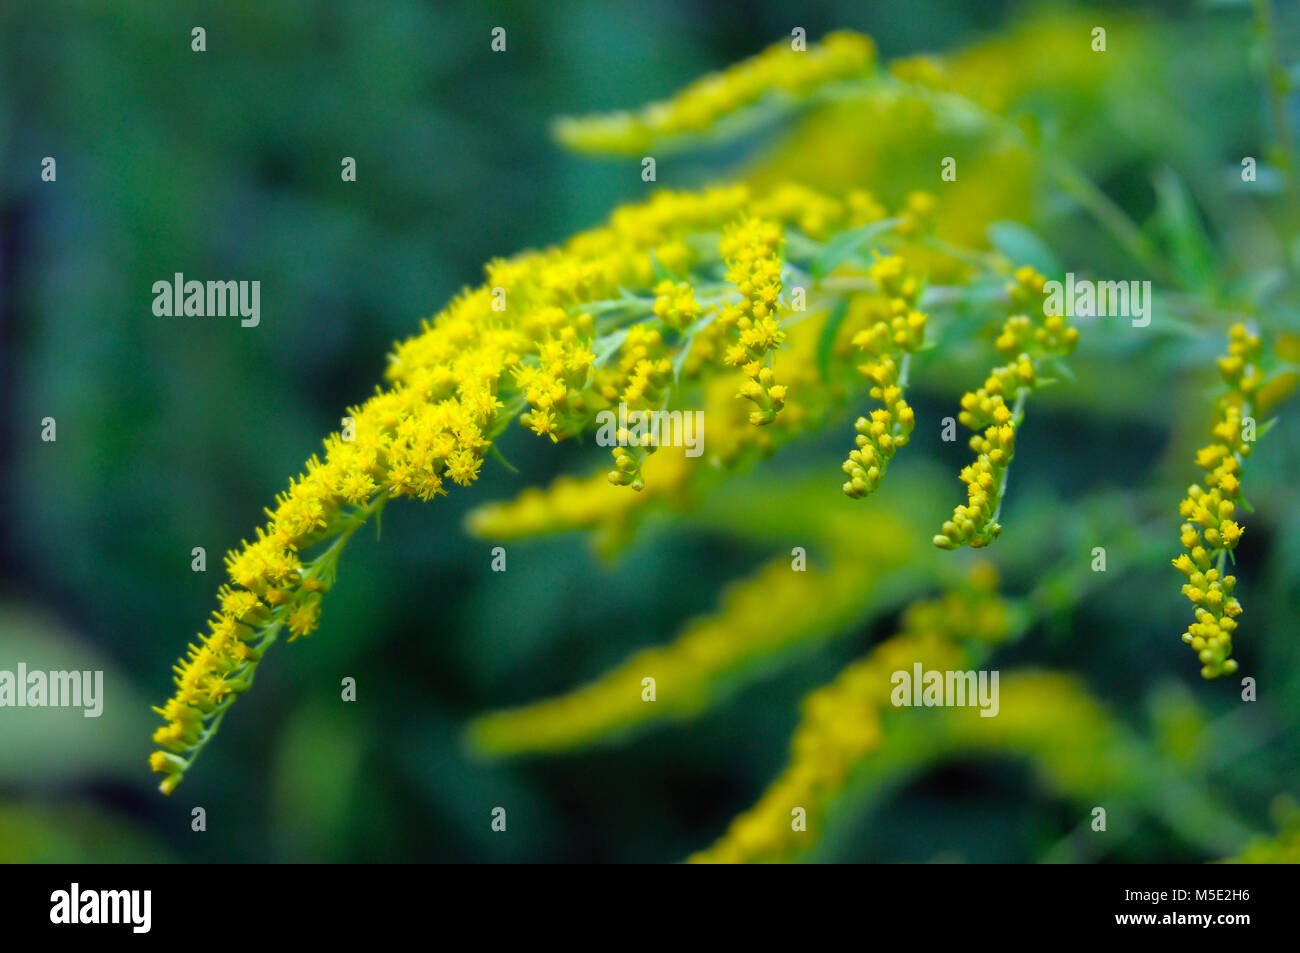 Flowering goldenrod in August, closeup Stock Photo